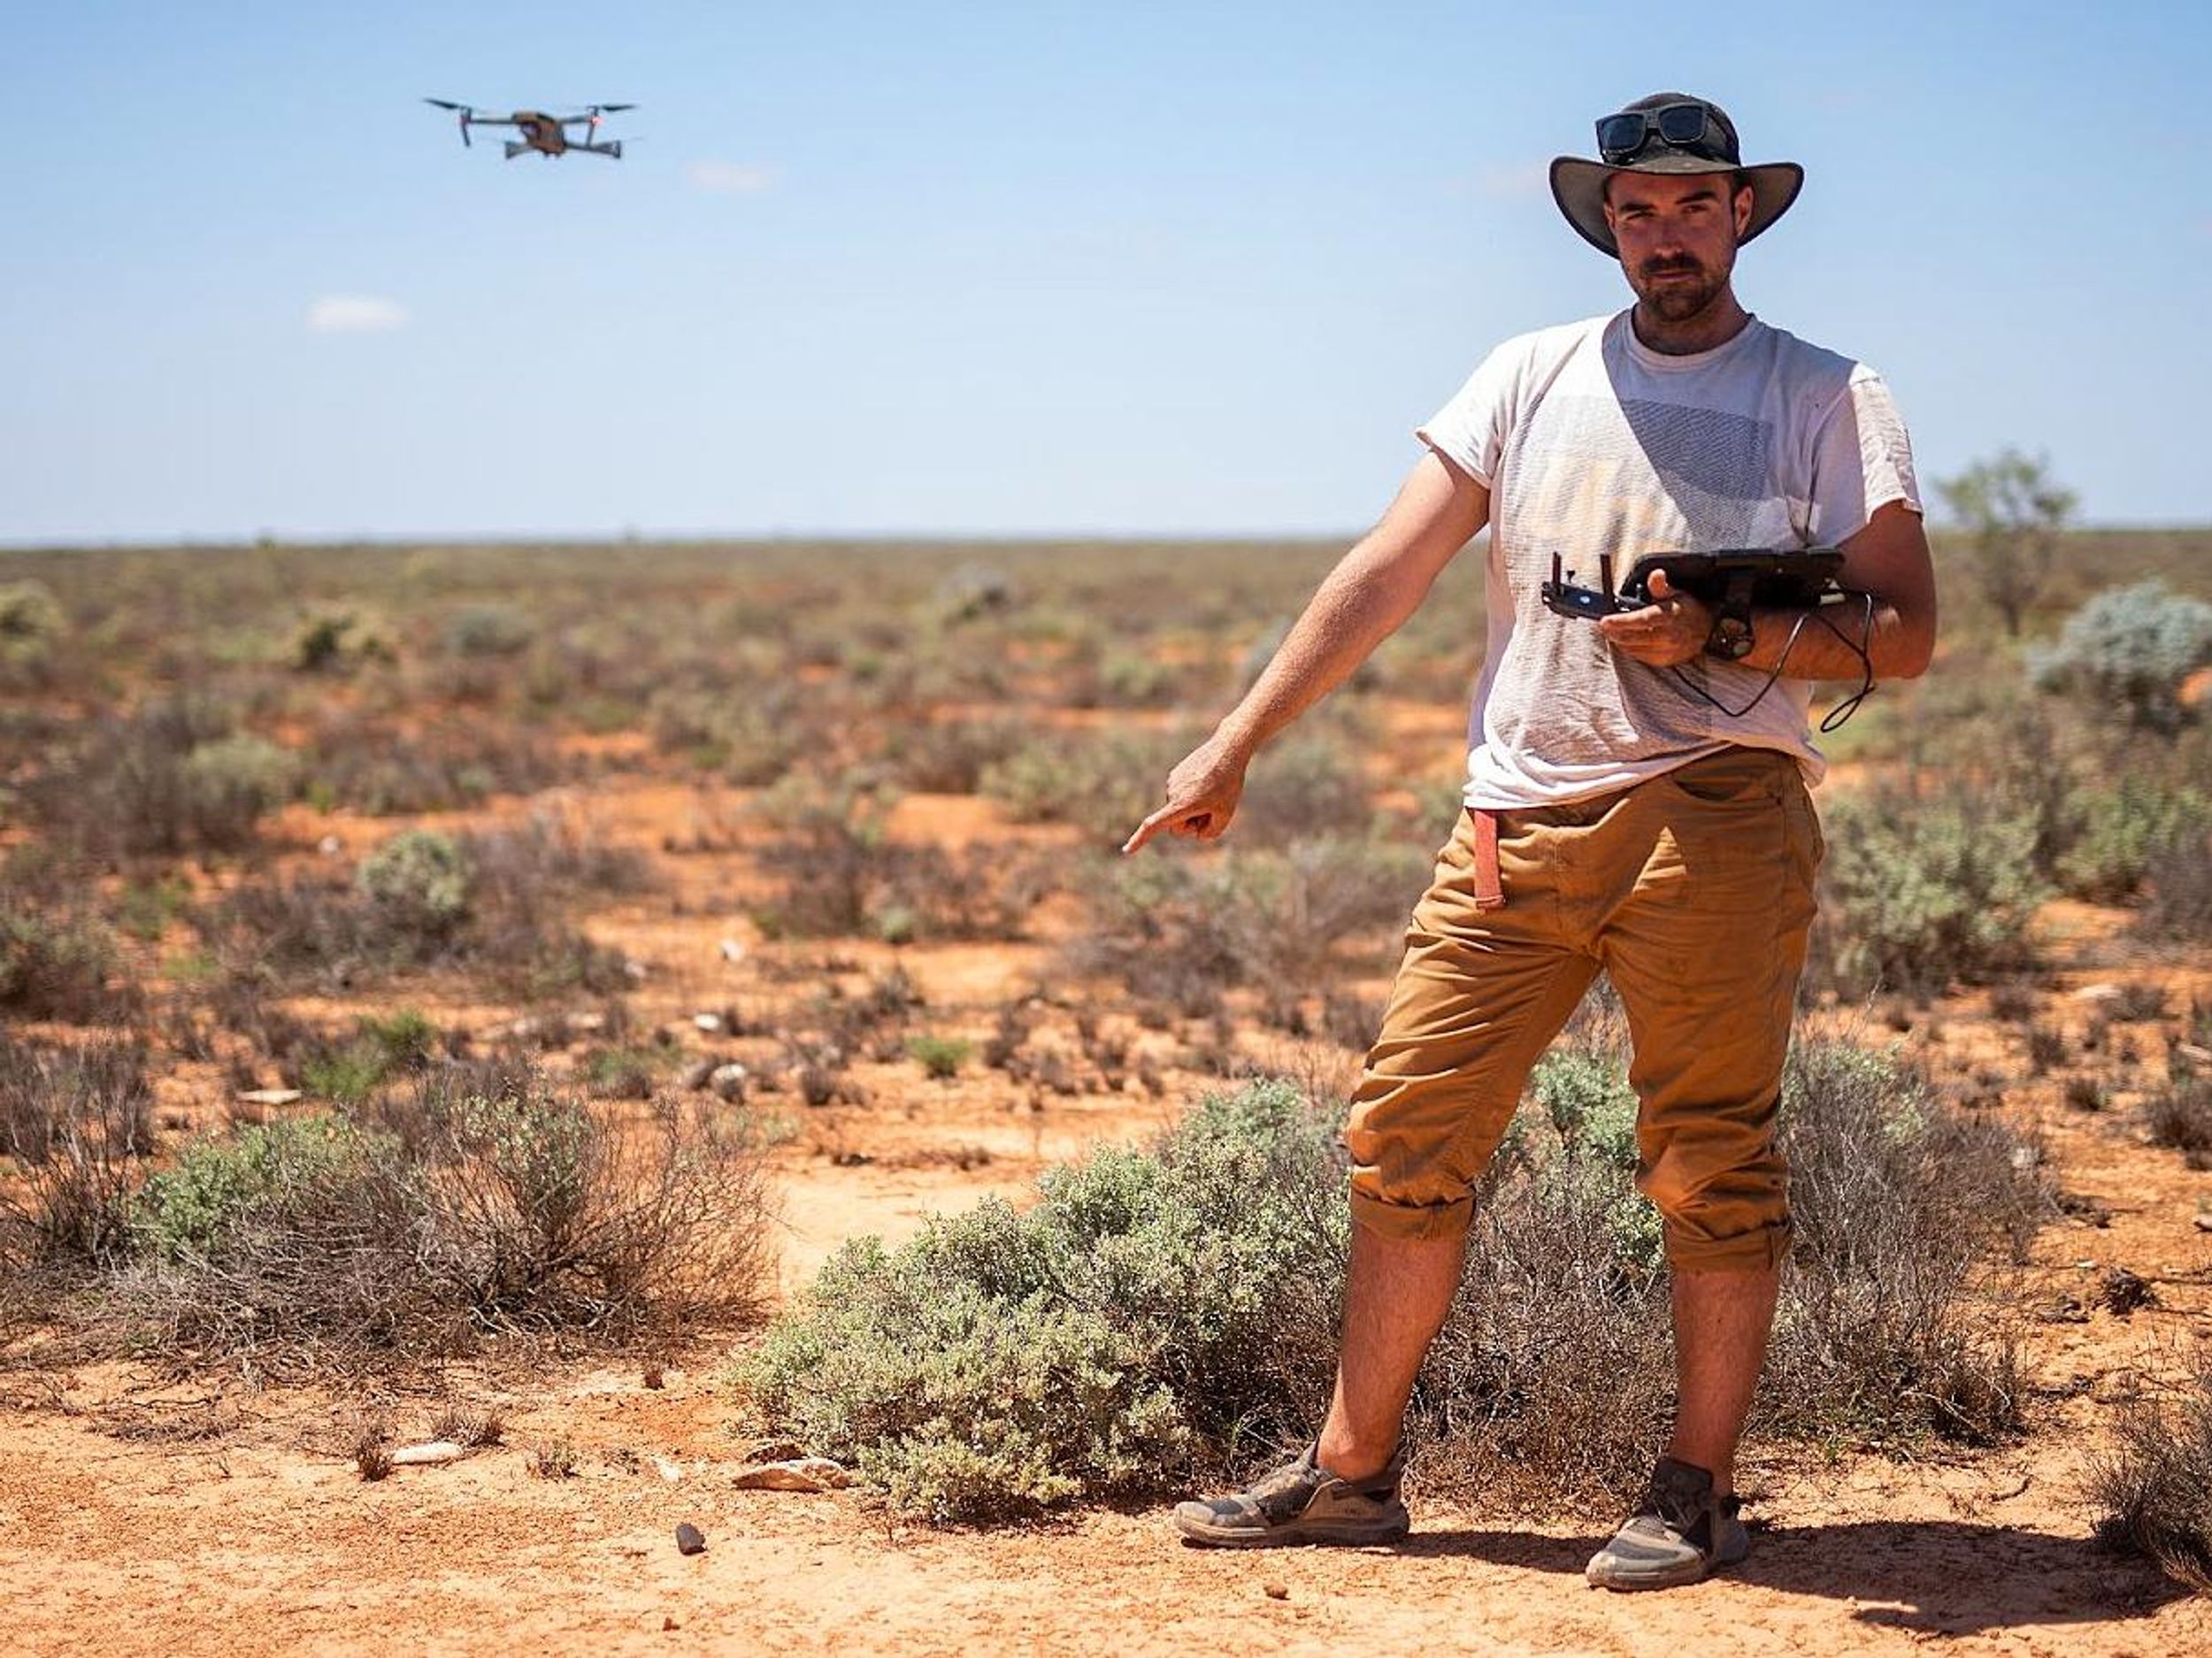 A man stands in the desert holding a remote controller for a drone that hovers in the air behind him. He is pointing to a small dark object on the ground.